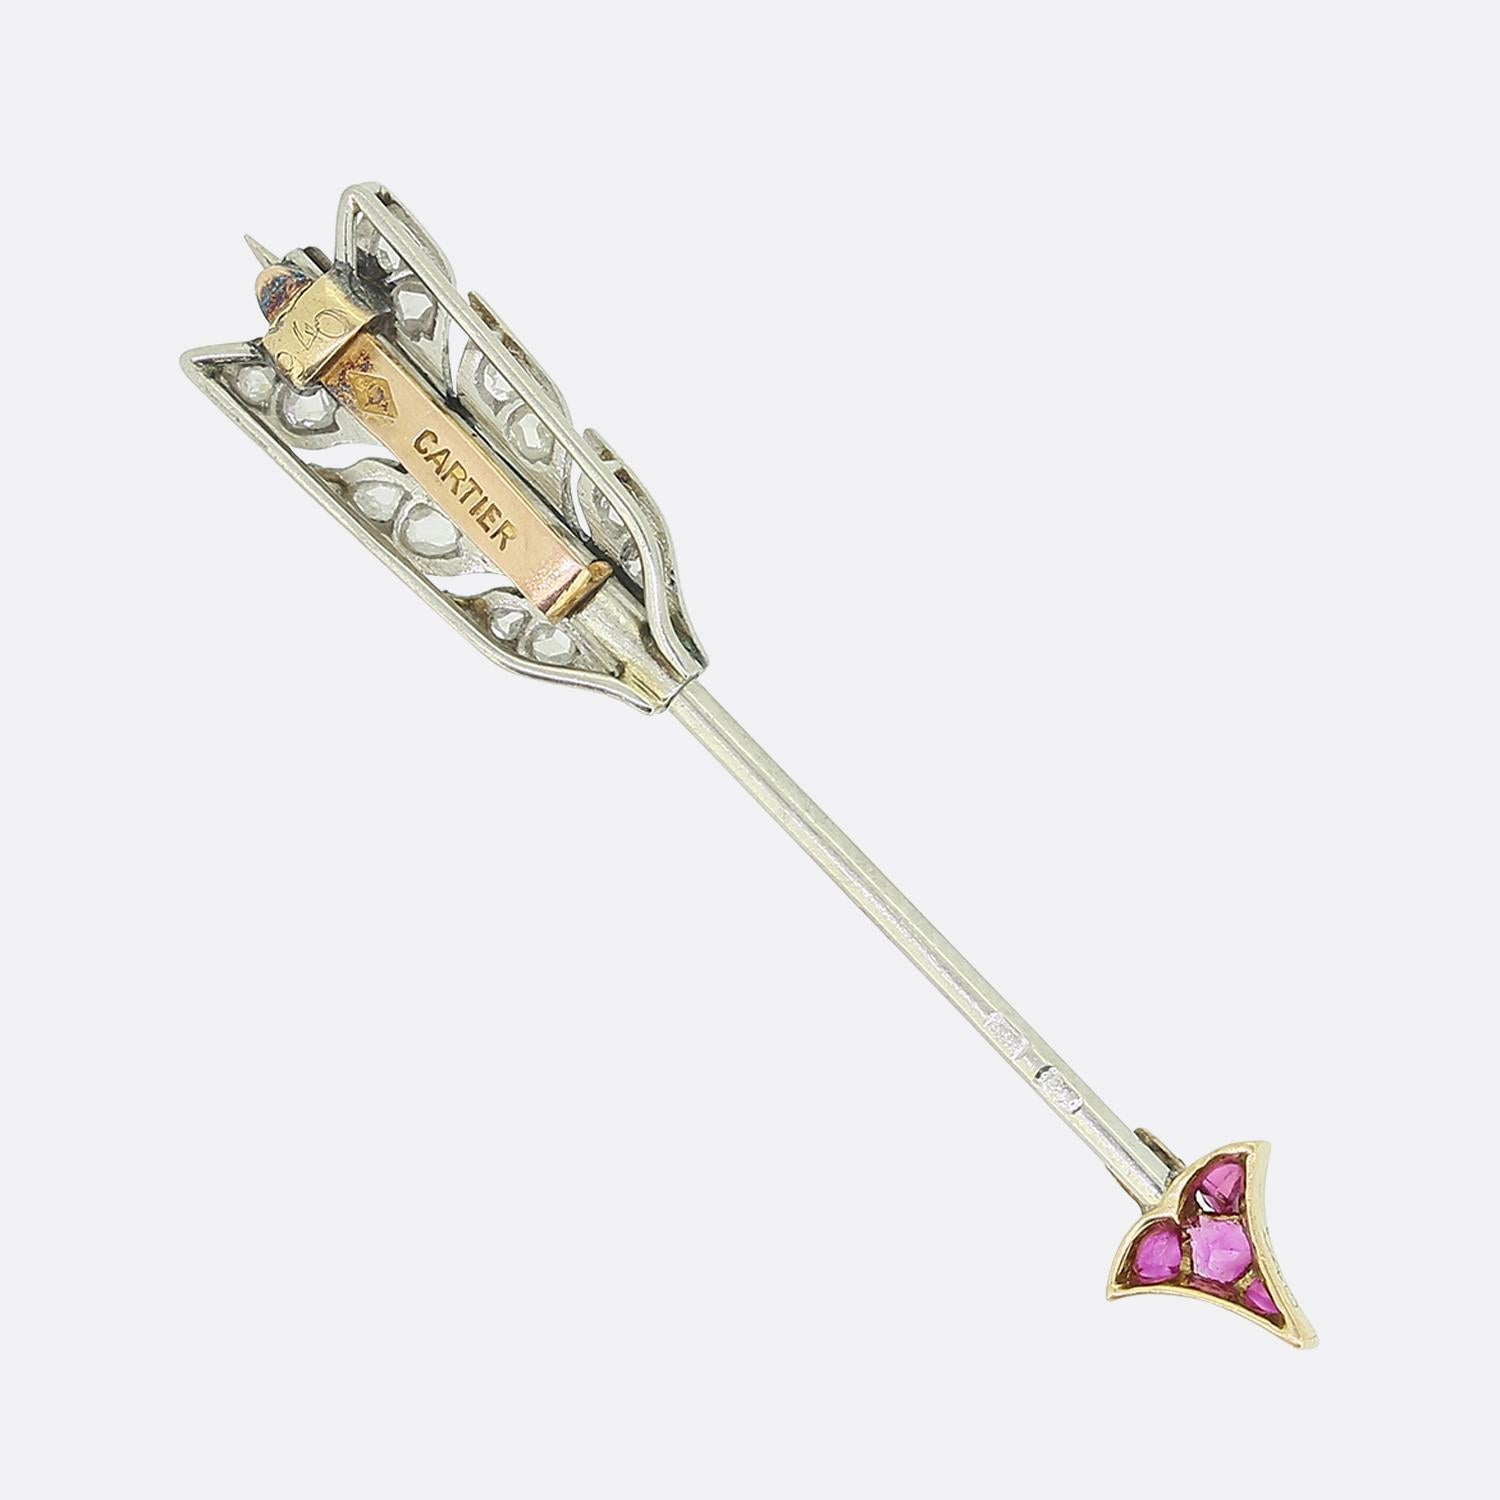 Here we have a fabulously rare Art Deco ruby and diamond arrow jabot pin from the world renowned jewellery house of Cartier. This piece has been crafted in France from platinum and showcases calibre-cut pinky rubies set at the tip and shaft whilst